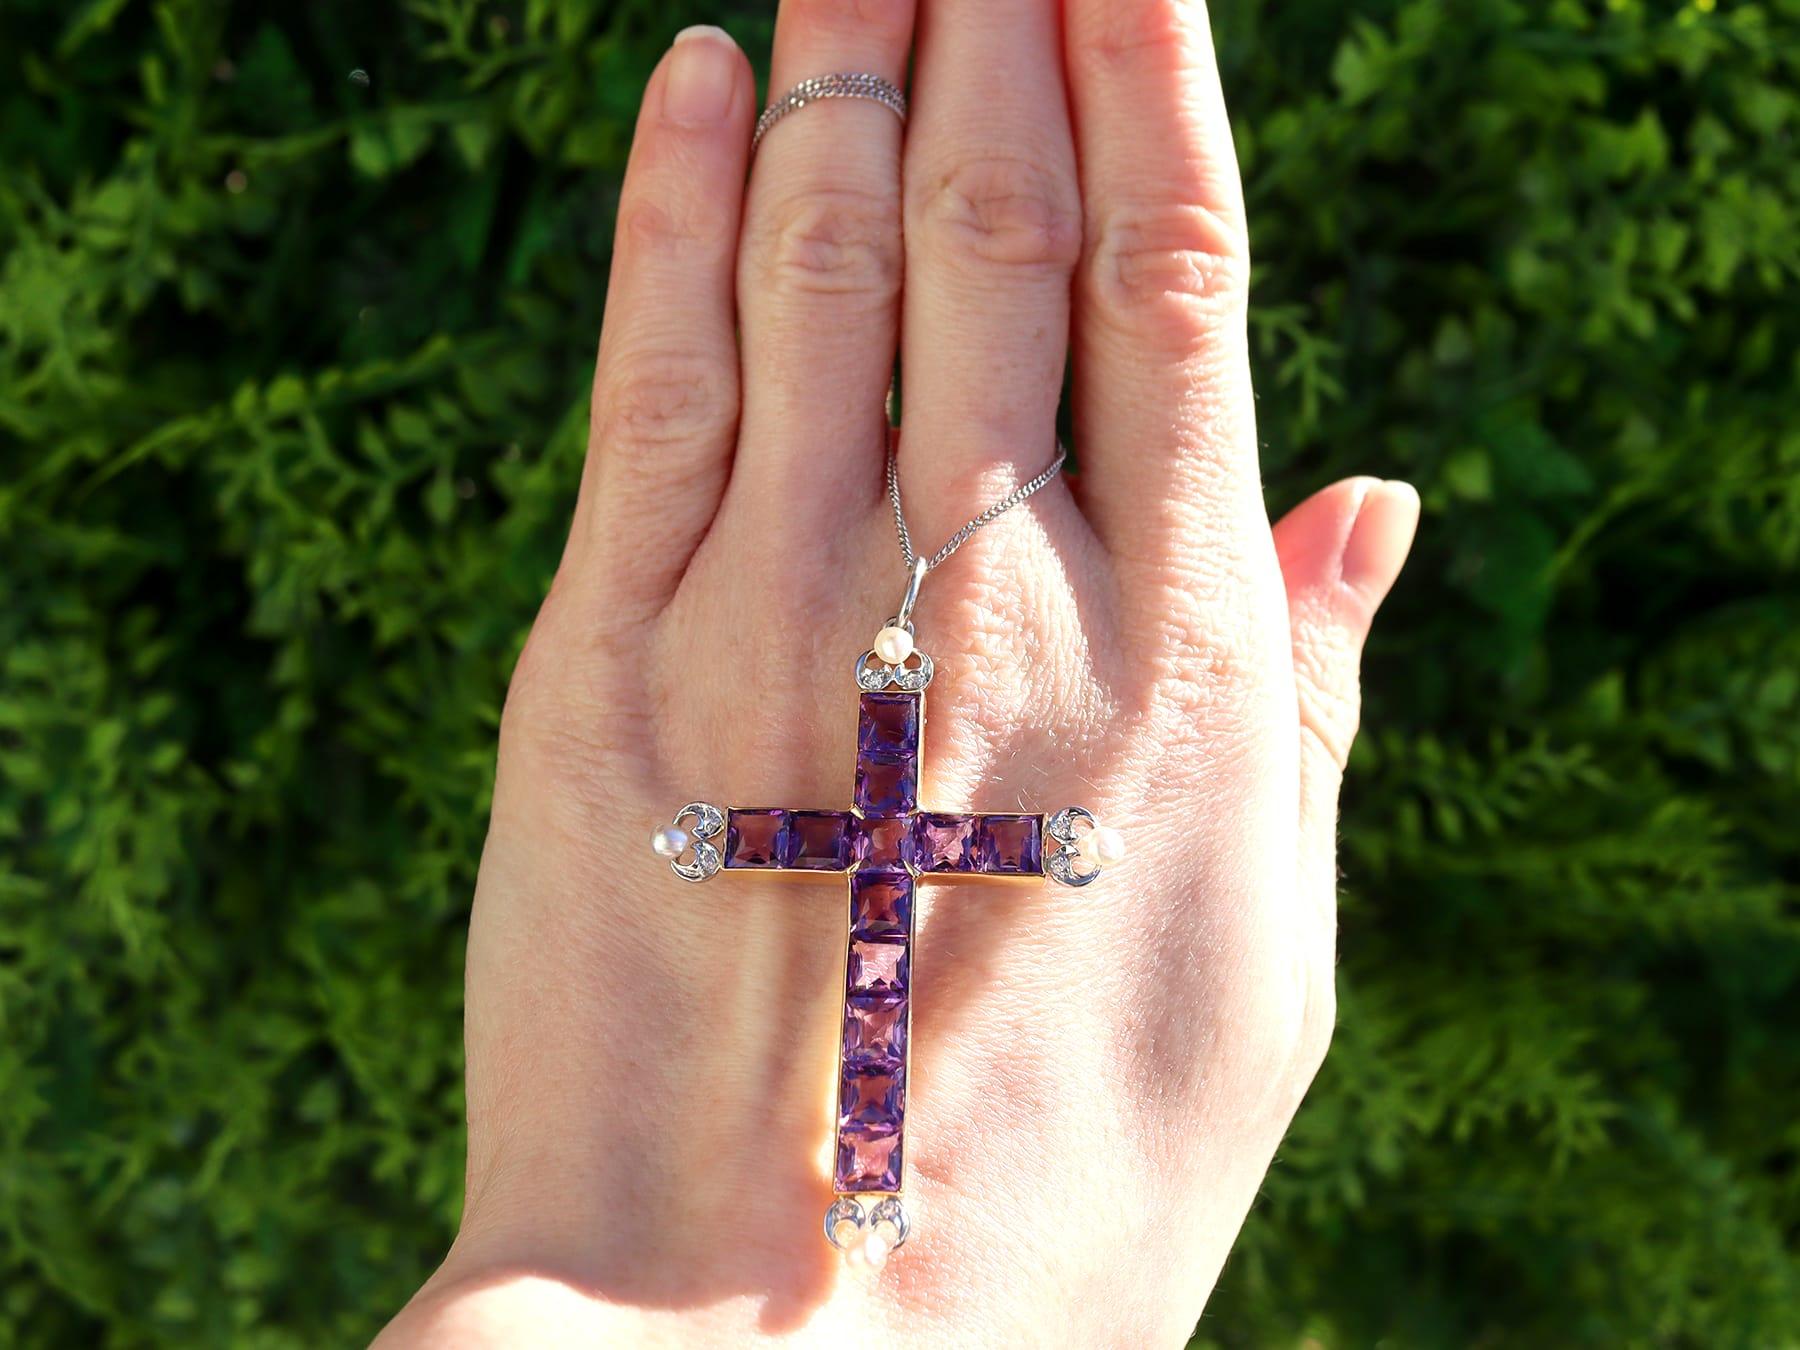 A stunning, fine and impressive antique 6 carat amethyst, pearl and 18 karat yellow and white gold cross pendant; part of our antique jewellery collections.

This stunning, fine and impressive antique pendant has been crafted in 18k yellow gold with